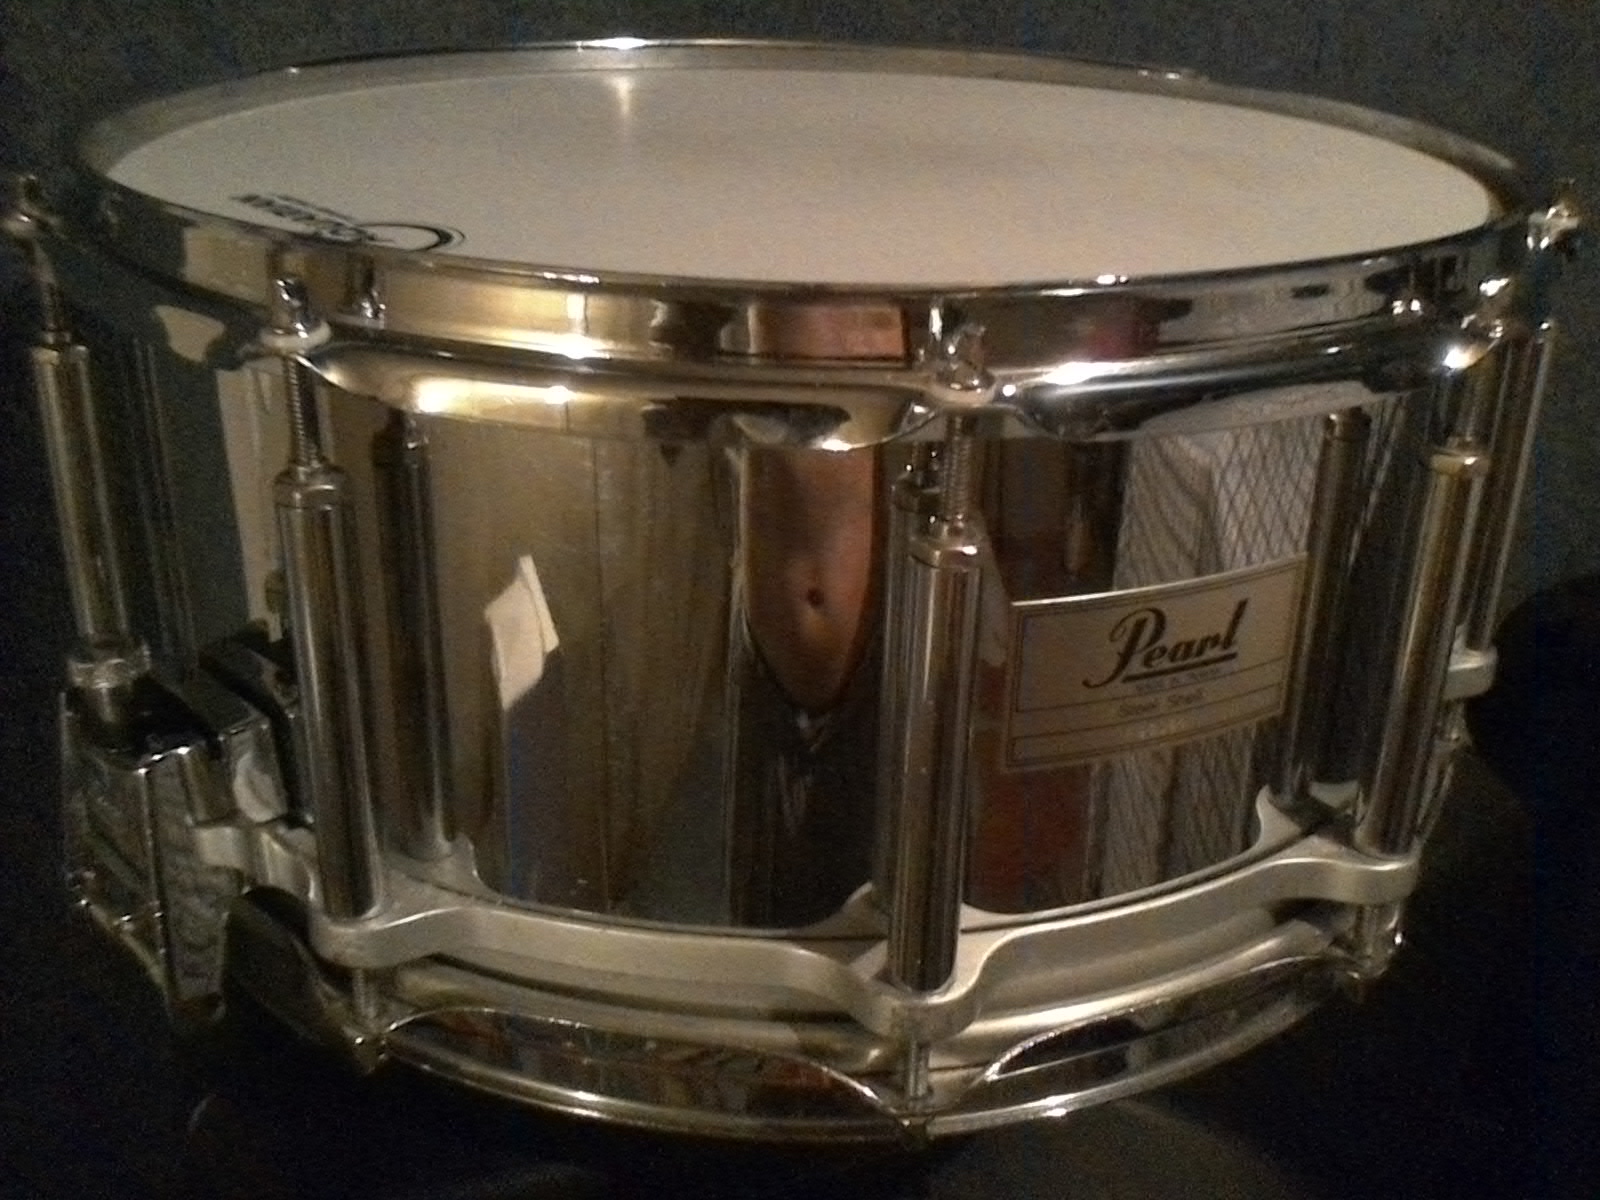 Caisse Claire Pearl Free Floating 14X8 Acajou Africain FTMH1480.